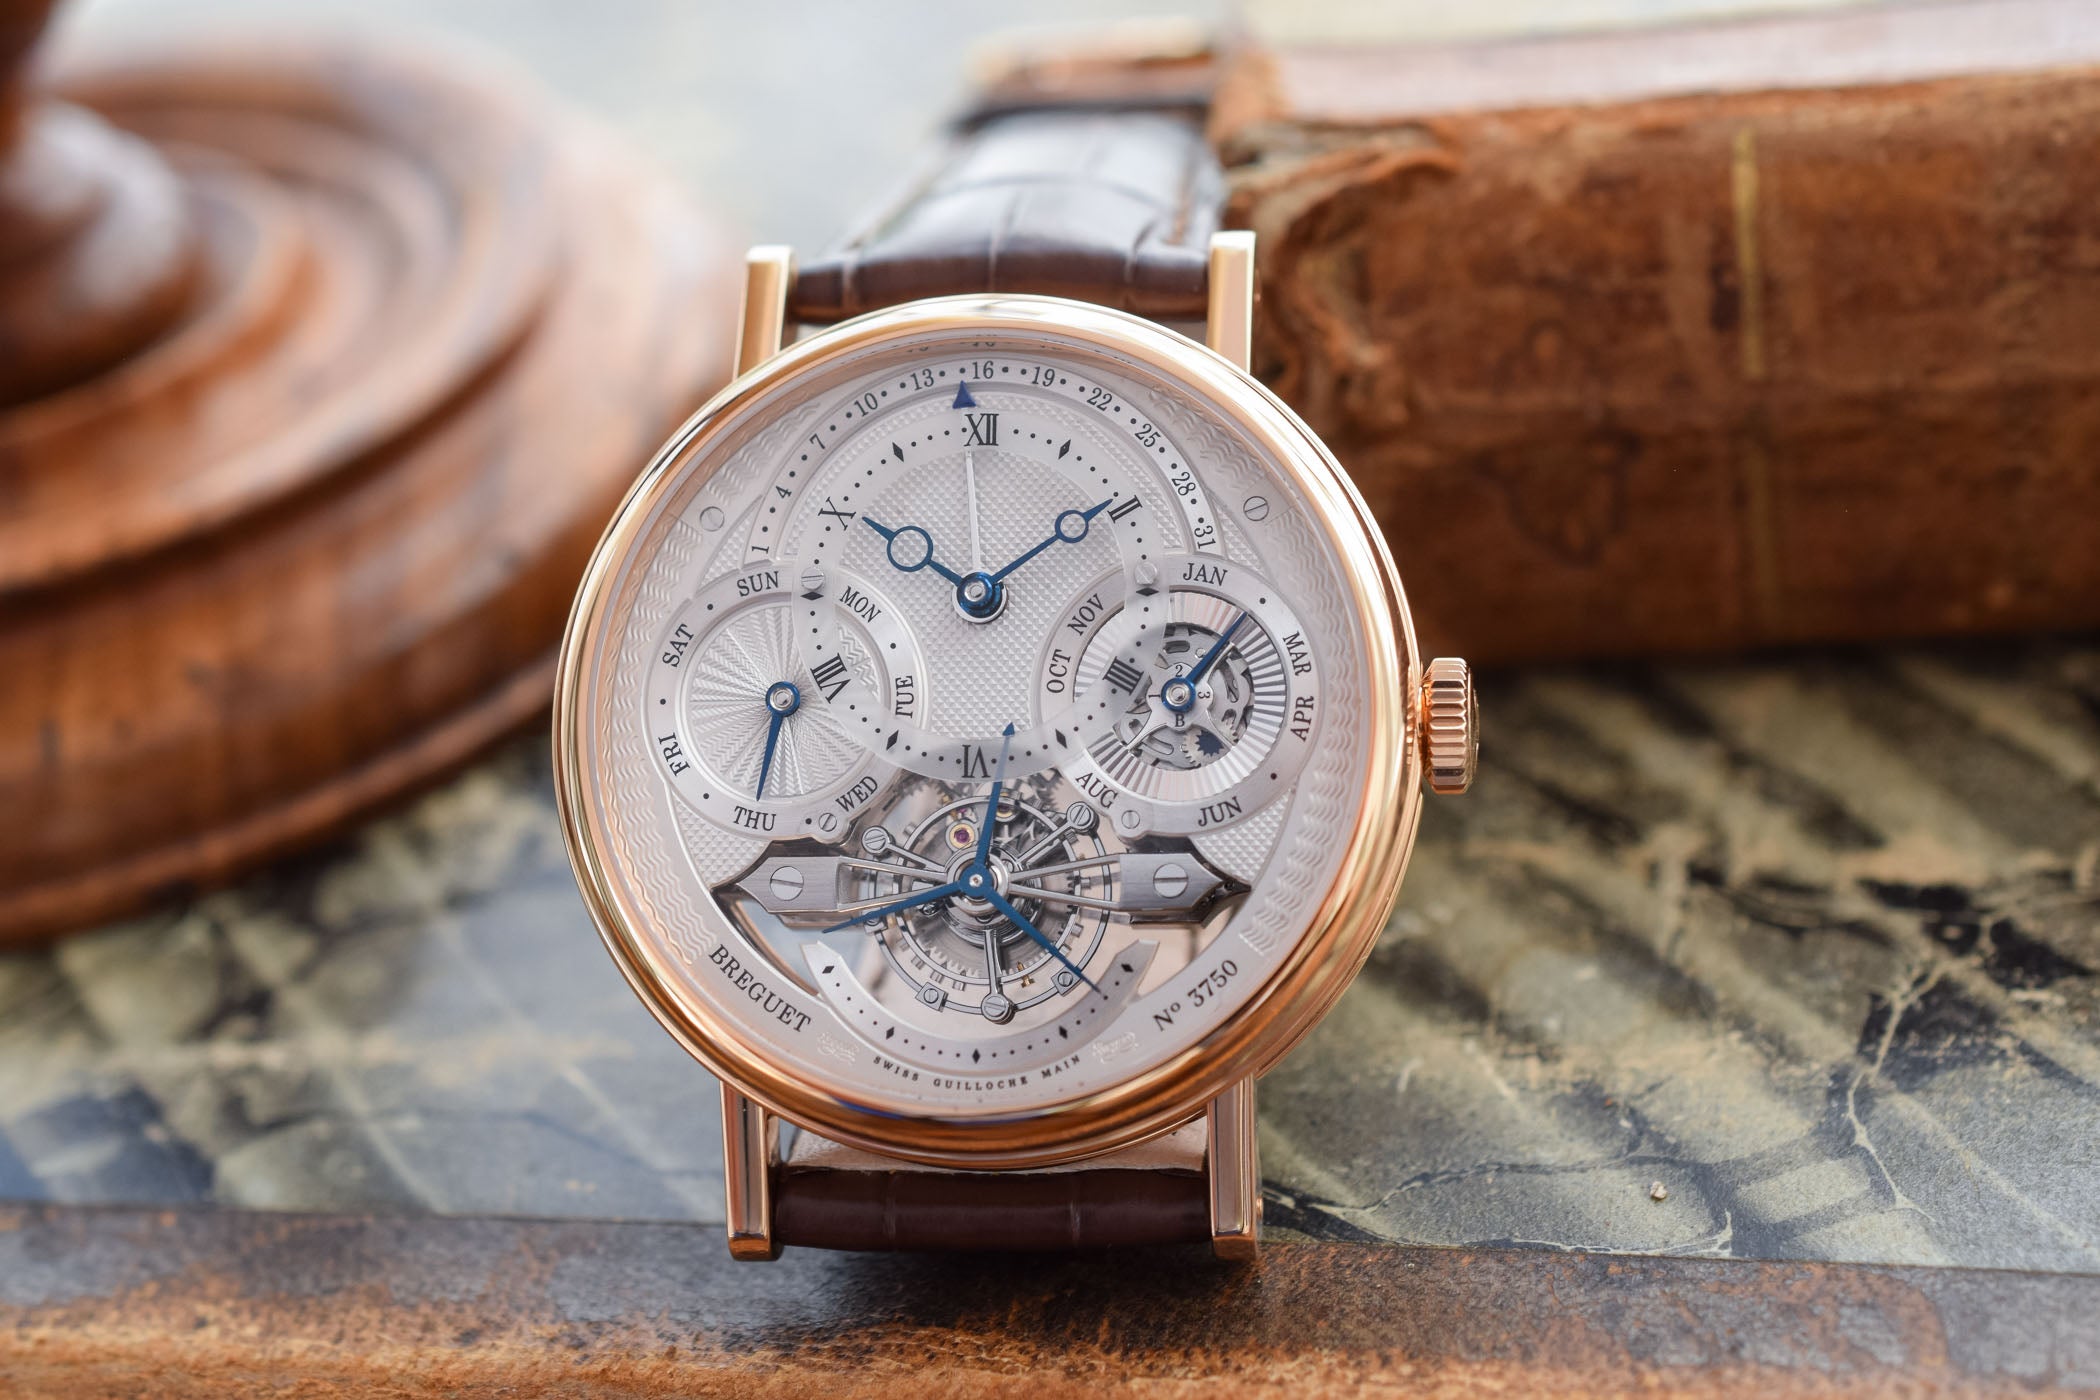 Buy BREGUET CLASSIQUE COMPLICATIONS with Bitcoin on BitDials